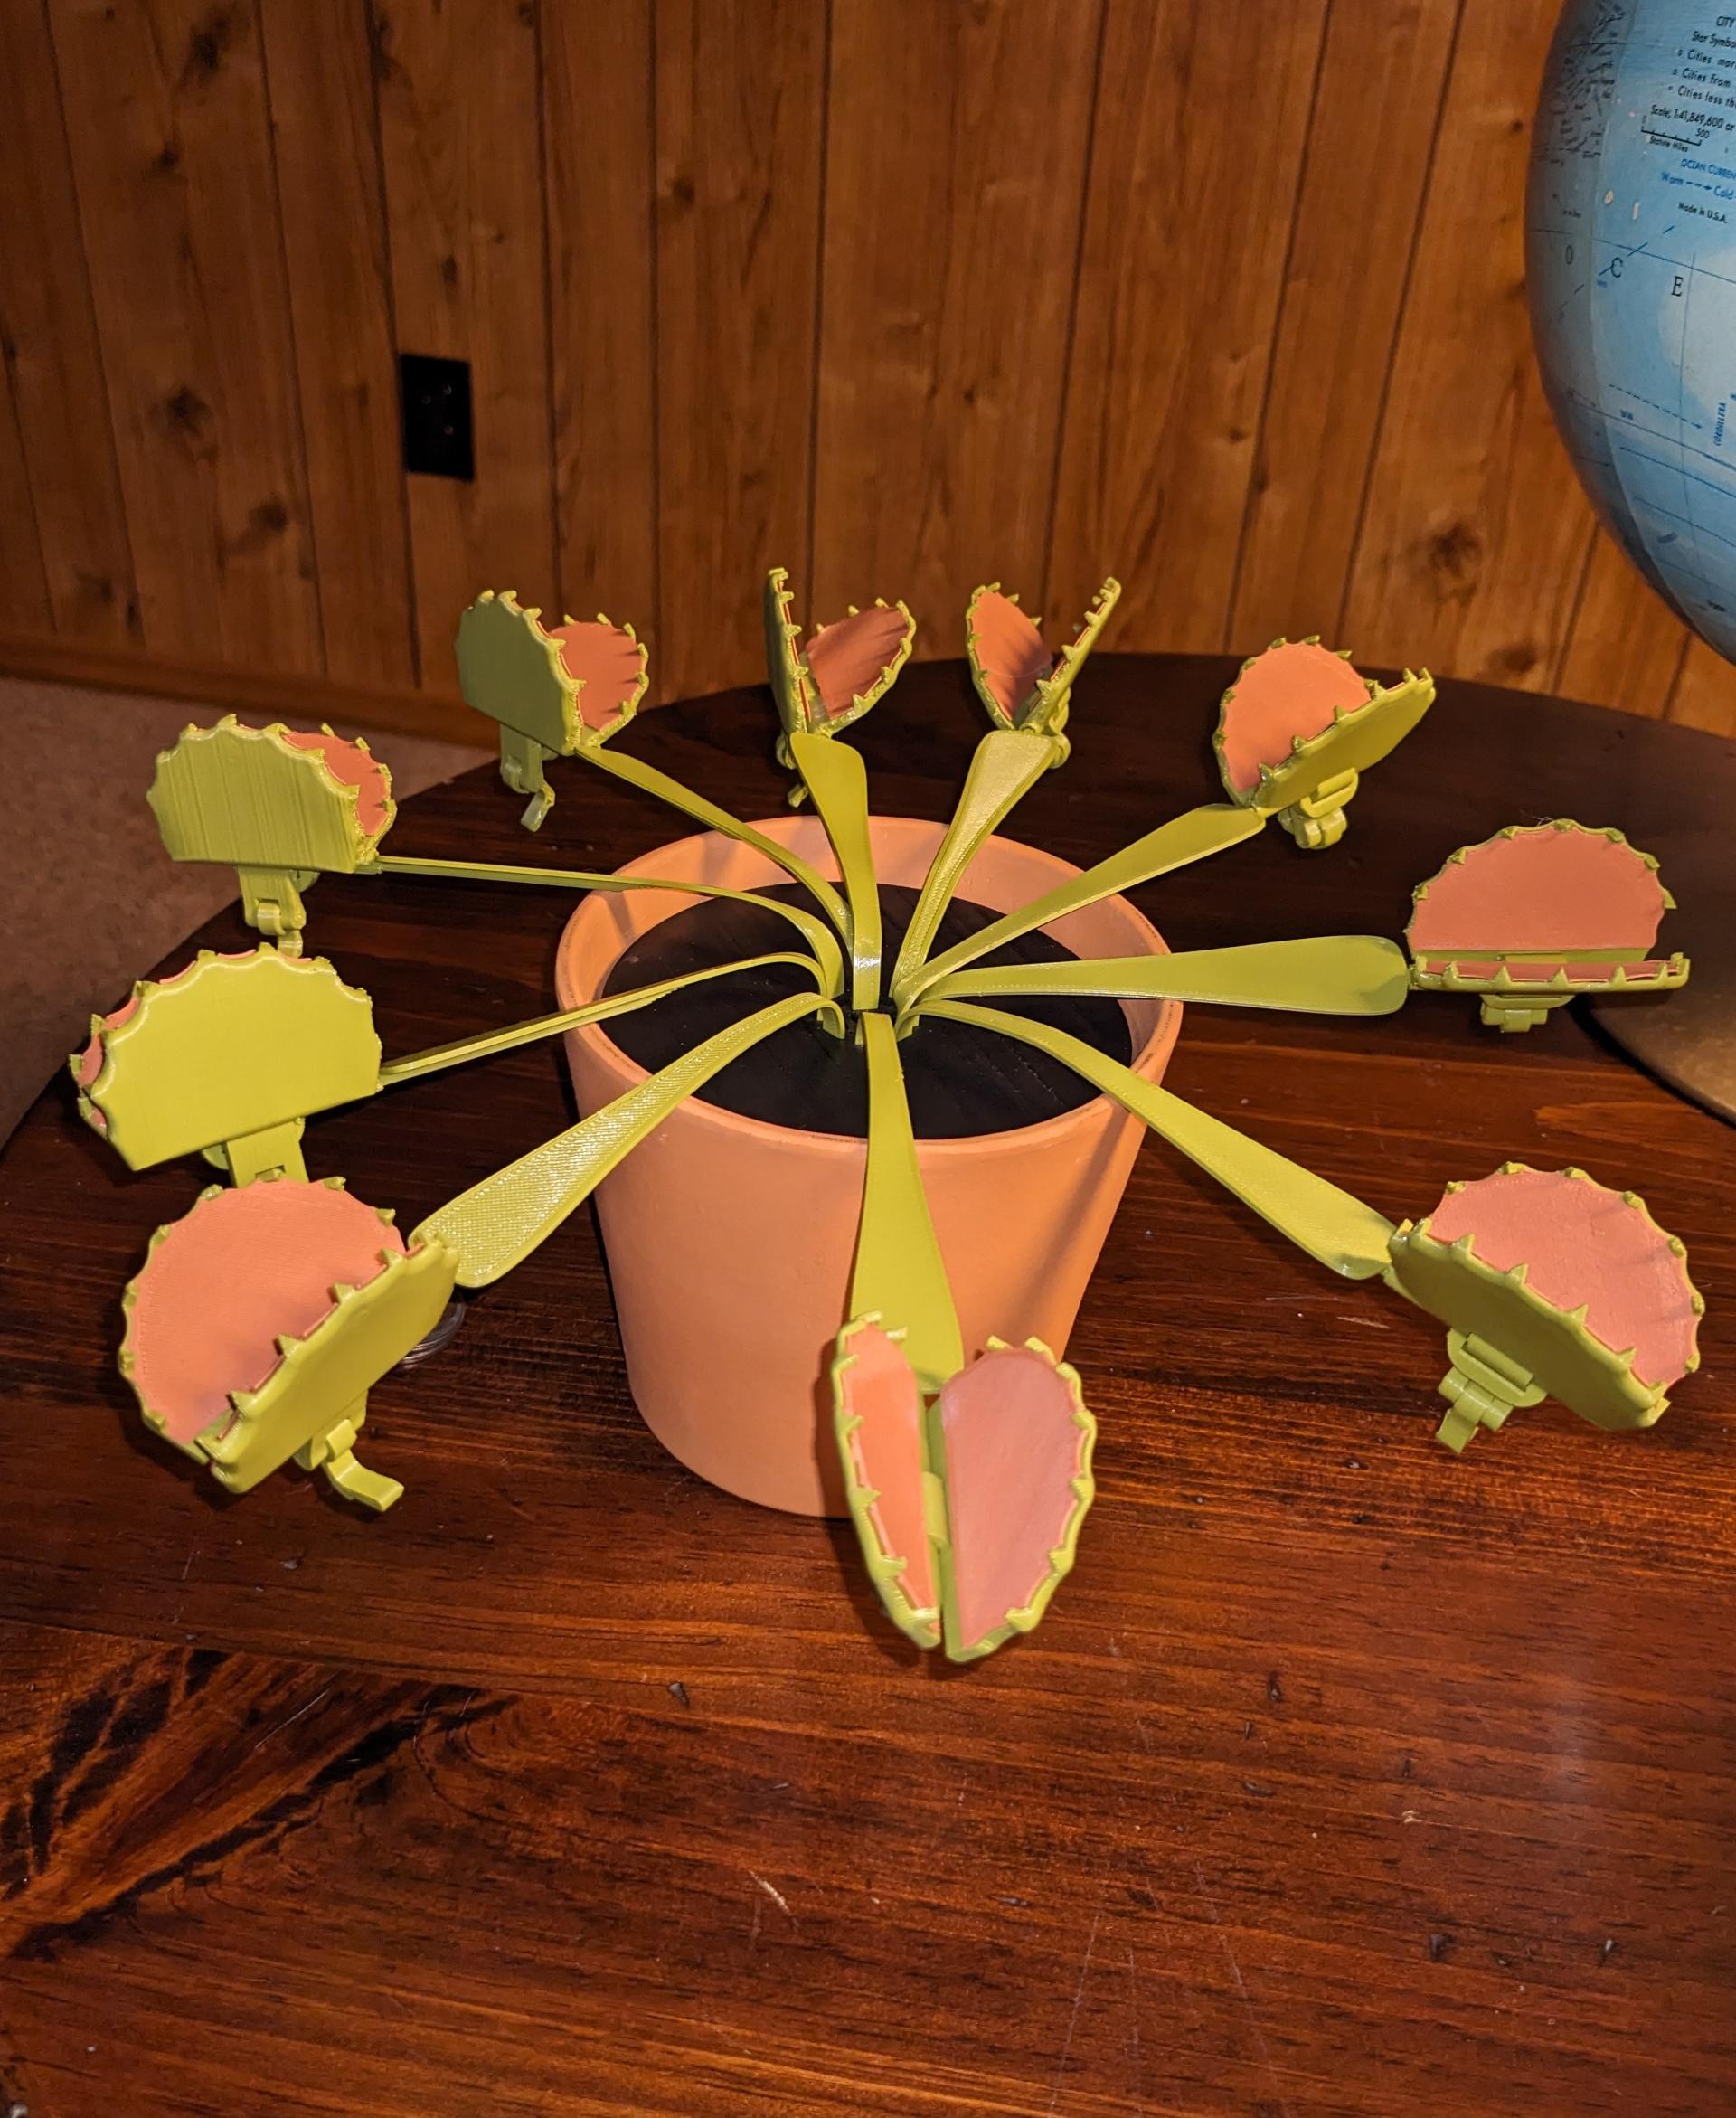 Venus Flytrap Snack Clips - Finally done! Took me WEEKS to get my printer refurbished and calibrated but I really wanted to make some of these plant prints.  - 3d model